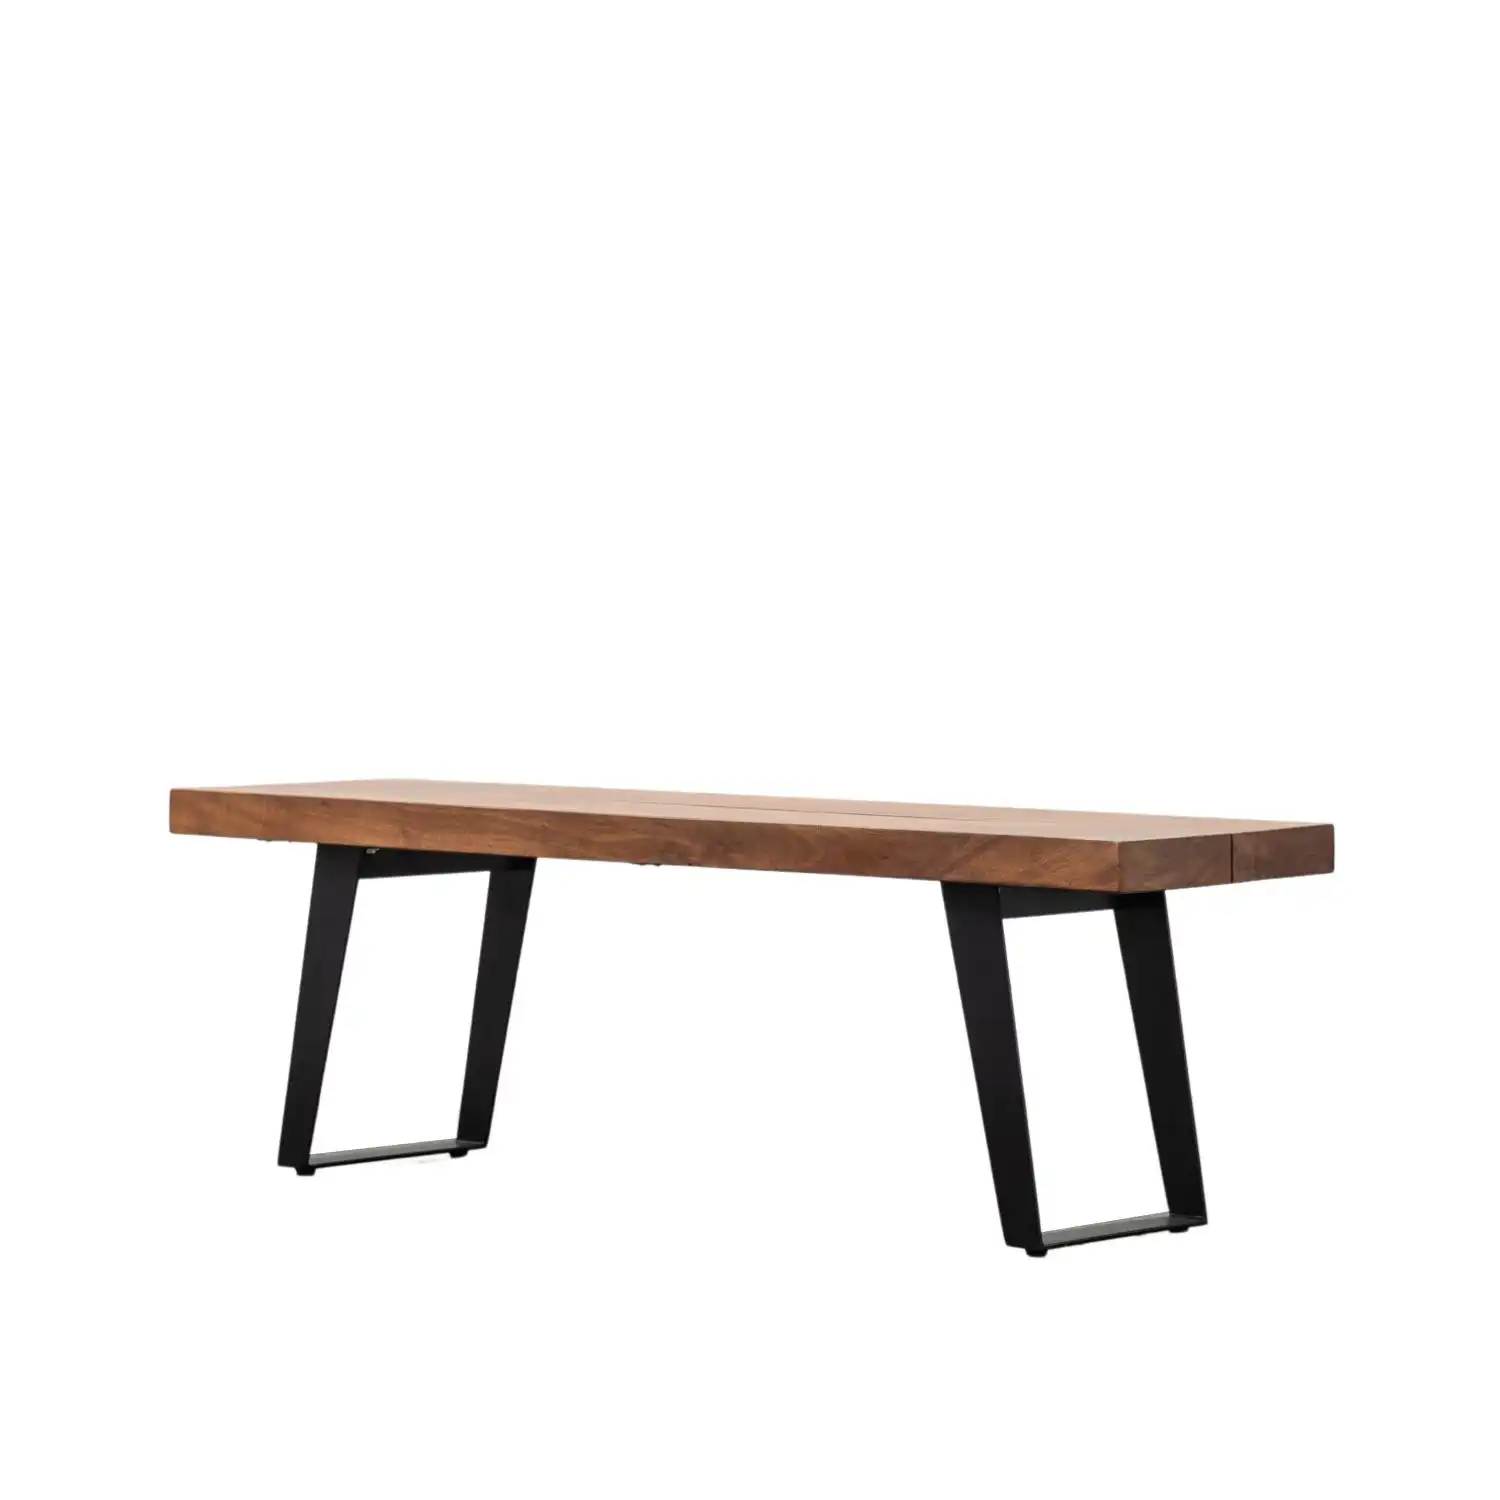 Small Wooden Dining Bench Black Metal Legs 140cm Wide